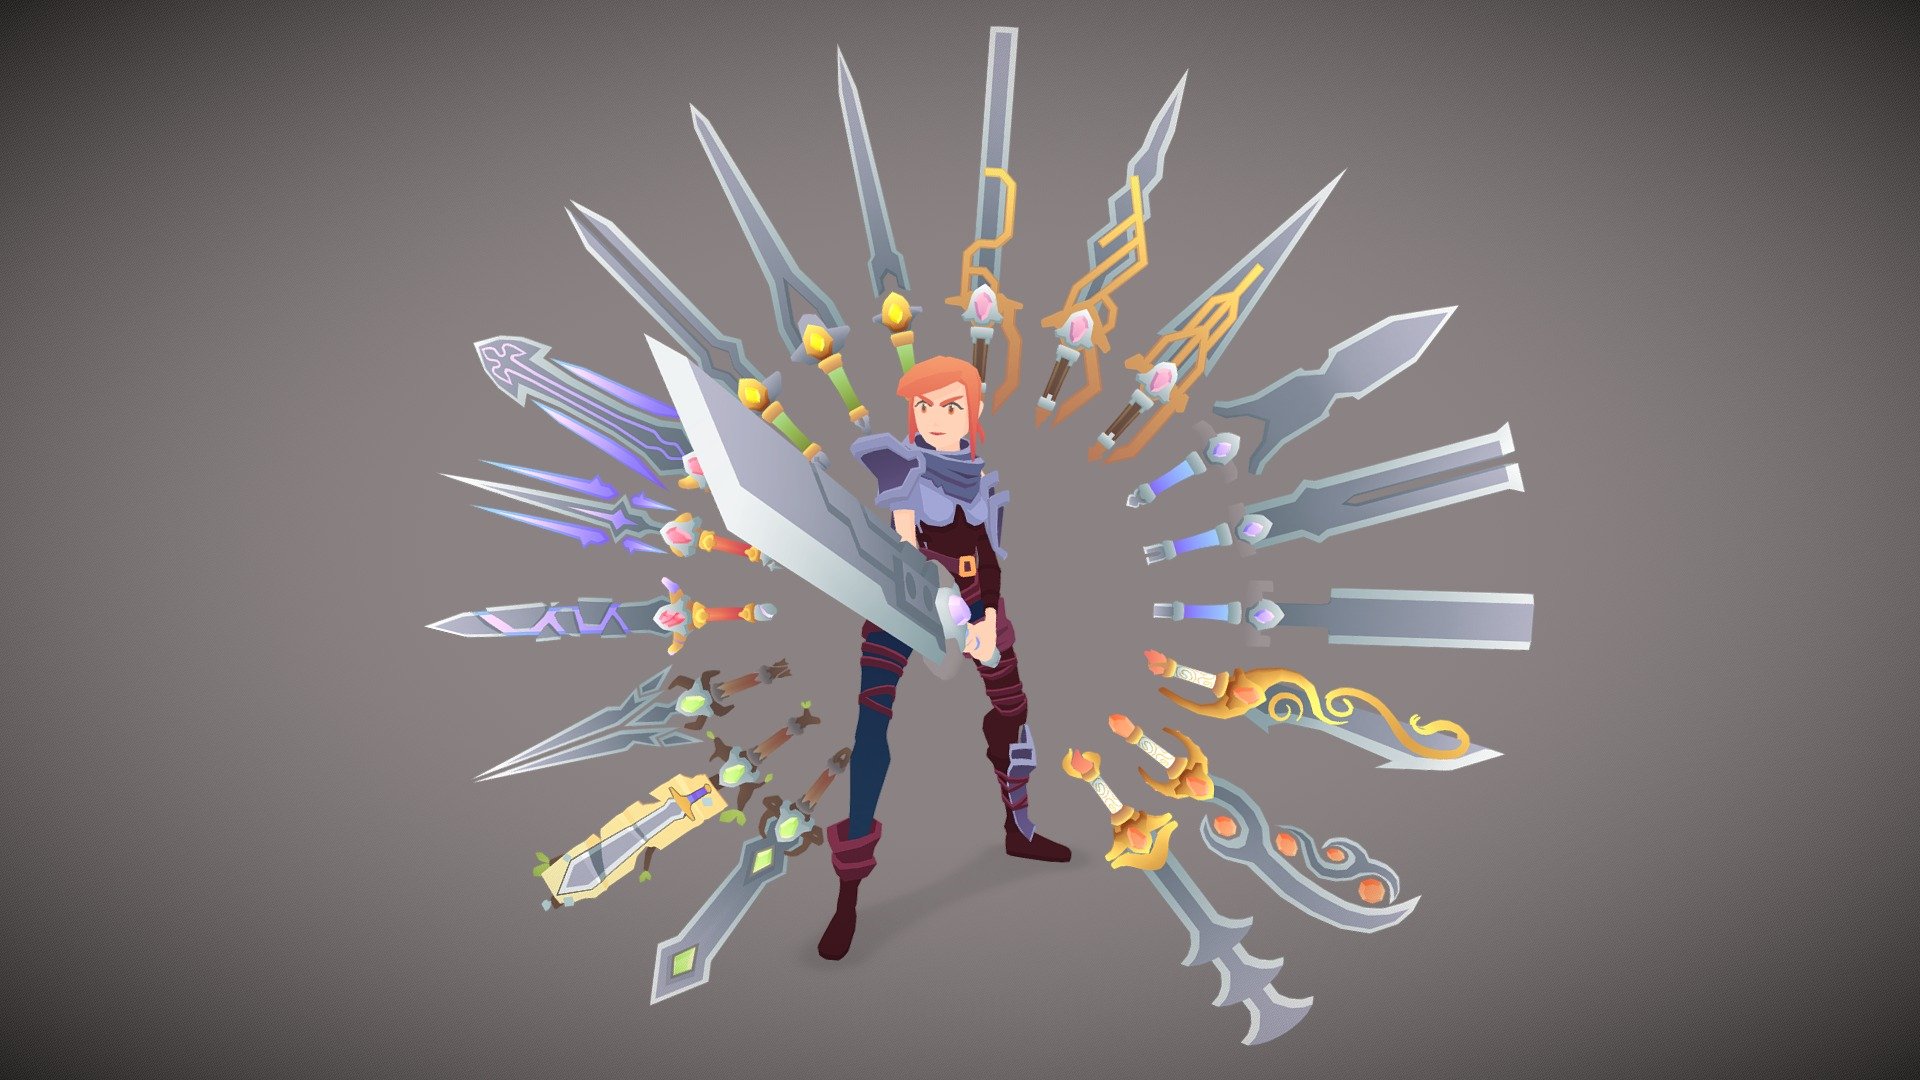 Collection of all Toon Weapons that are ready to be used in your cute cartoon game. Each prop is around 500 - 1100 tris and share a 512x512 texture map.

This Pack is 22% off compared to single purchase and includes 94 weapons:




58 Toon Swords: (https://skfb.ly/6TFyu)

6 Toon Shields: (https://skfb.ly/6TINo)

6 Toon Axes: (https://skfb.ly/oGnQL)

6 Toon Scythes (https://skfb.ly/oG66L)

18 Toon Spears (https://skfb.ly/oGnWp)

1 Texture Palette

All models share the same texture map. Texture map consists of different flat colors and gradients. Move the UV inside a 3D program to change the color. You can also create your own gradients and use them for the equipment.

As a Bonus, you get the fully rigged Wielder of the Weapons as well.

Make sure to download the &ldquo;Additional Files